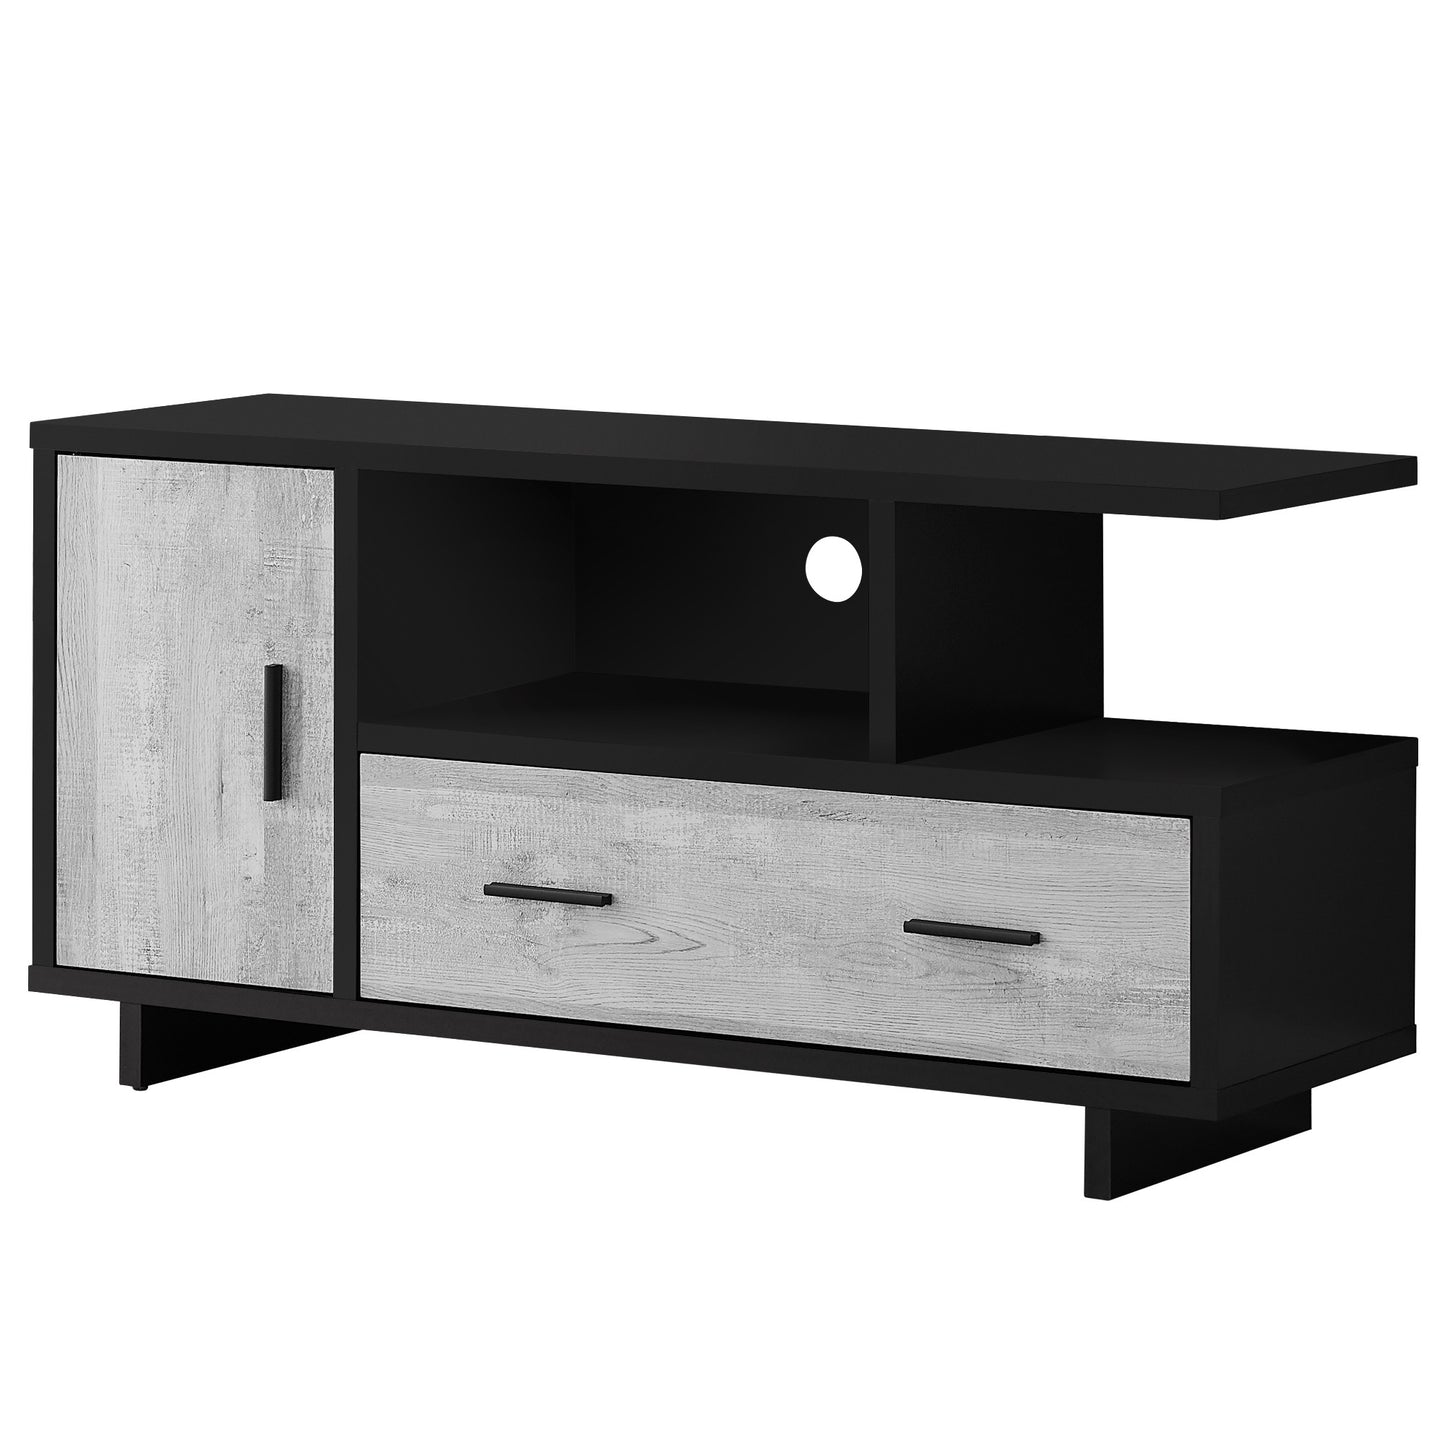 23.75" Particle Board Laminate And Mdf TV Stand With Storage